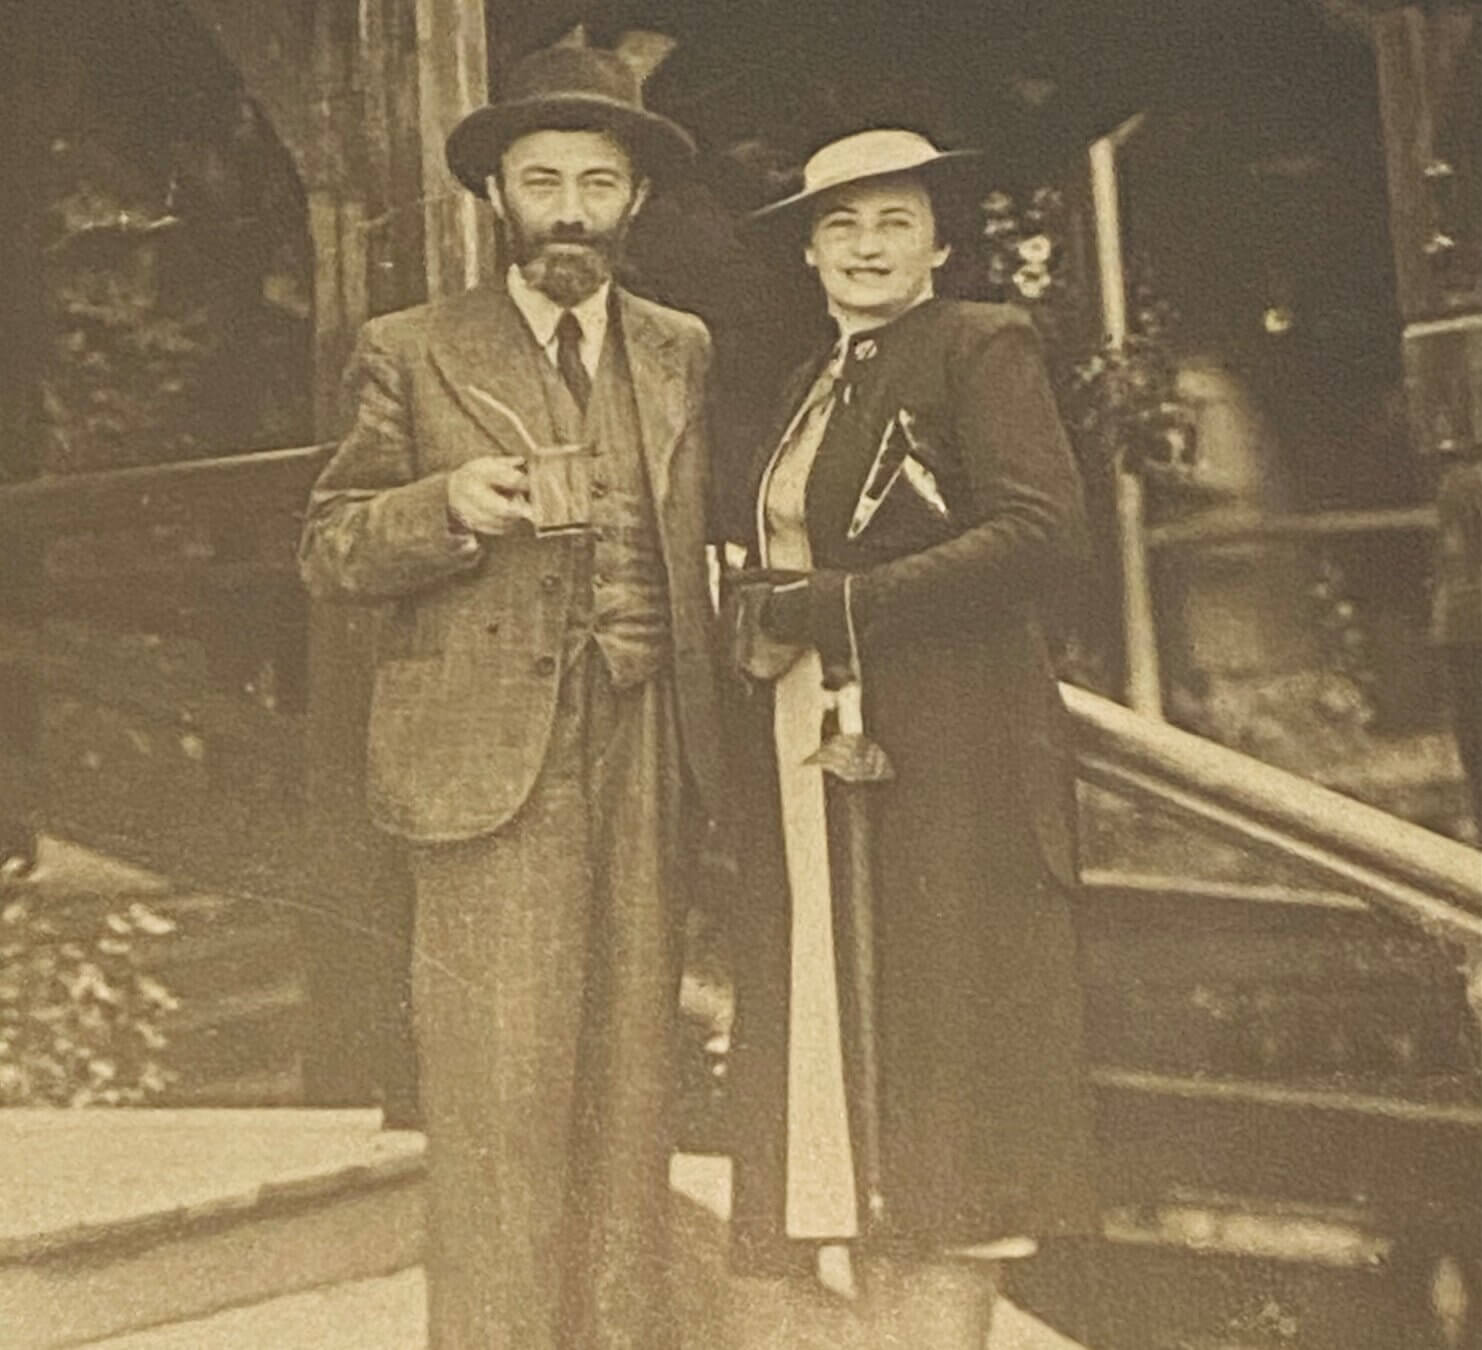 Naftali Gartner and his wife, Chana Backenroth Gartner, were in their forties when they were murdered by the Nazis. They are pictured here in a resort when they were in their thirties.